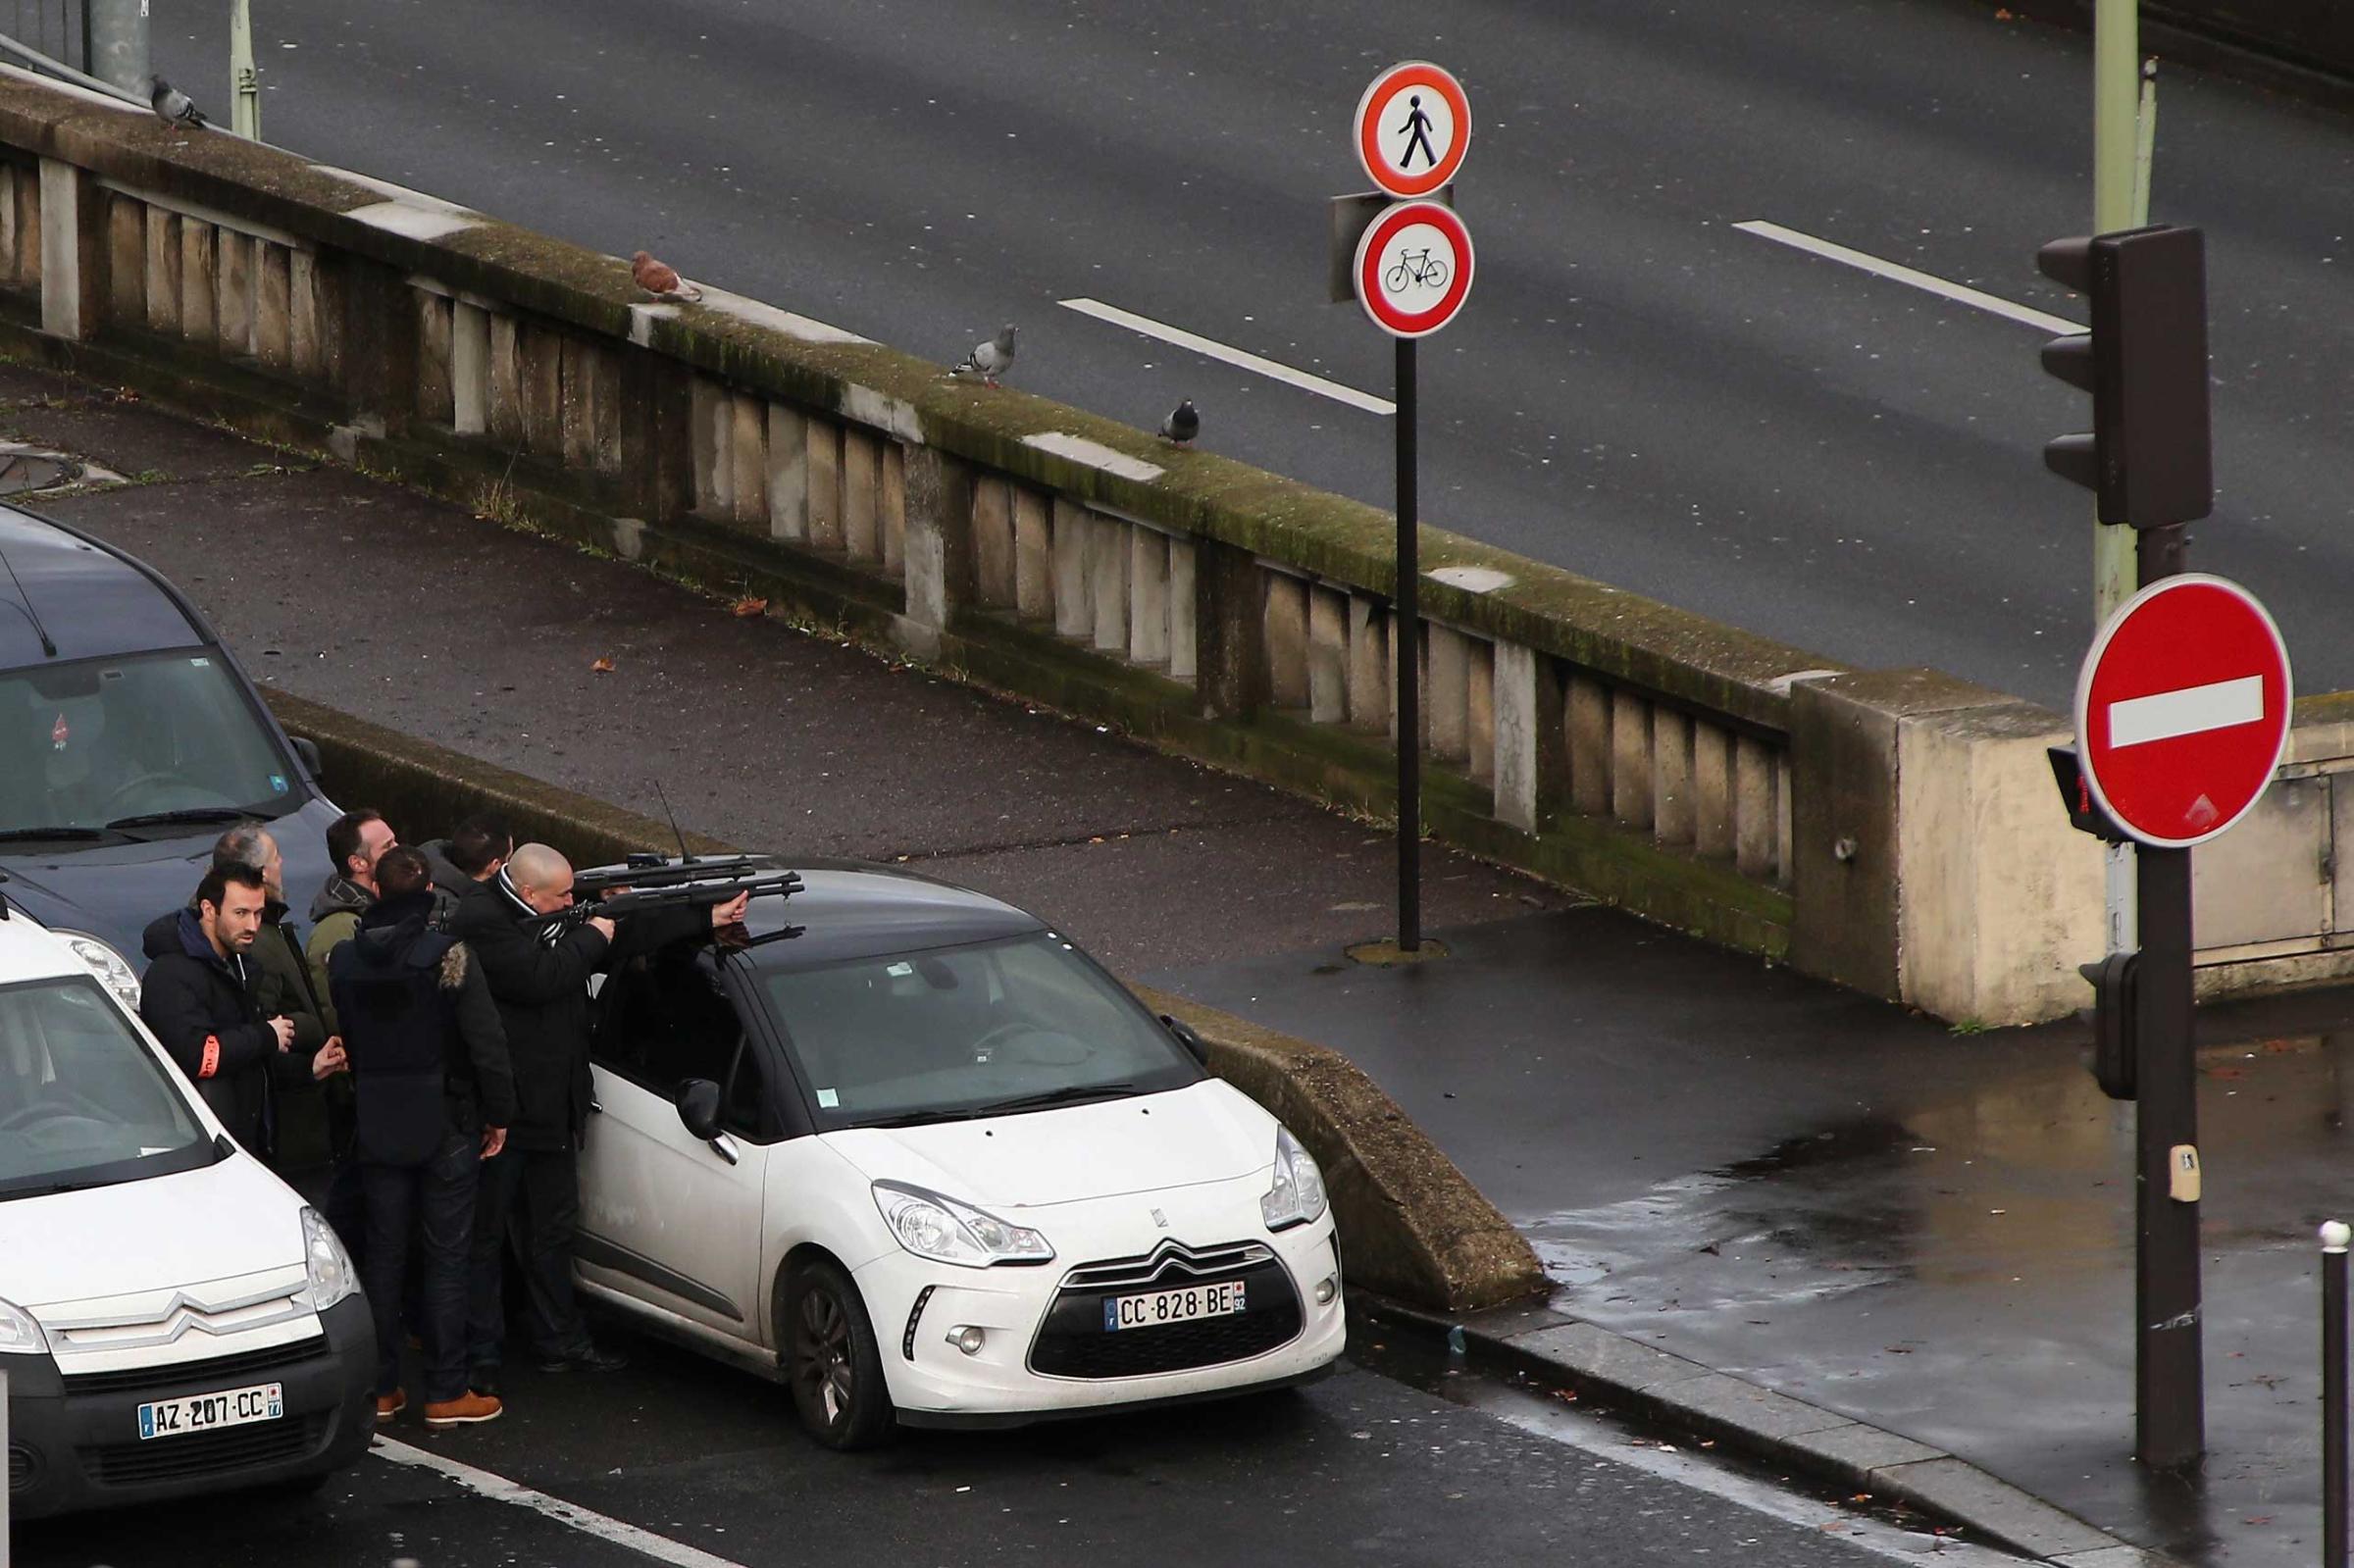 Police are mobilized with reports of a hostage situation at Port de Vincennes on Jan. 9, 2015 in Paris.